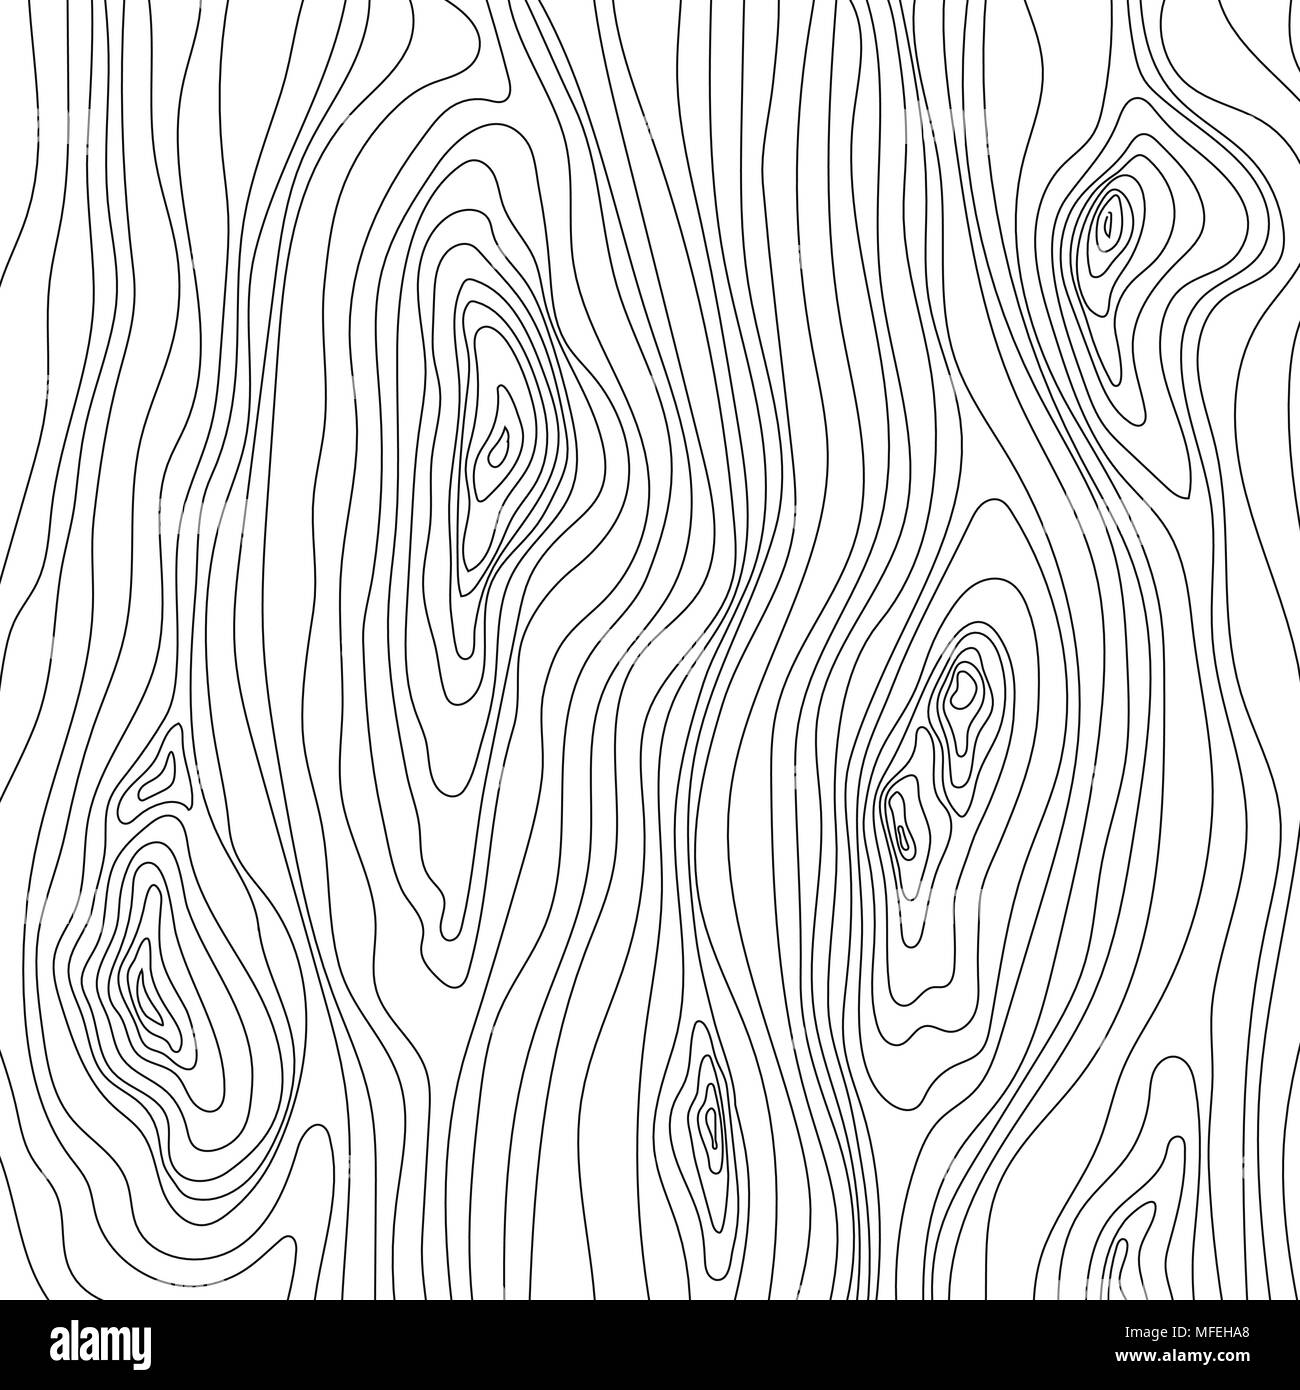 Wooden texture. Wood grain pattern. Abstract fibers structure background, vector illustration Stock Vector